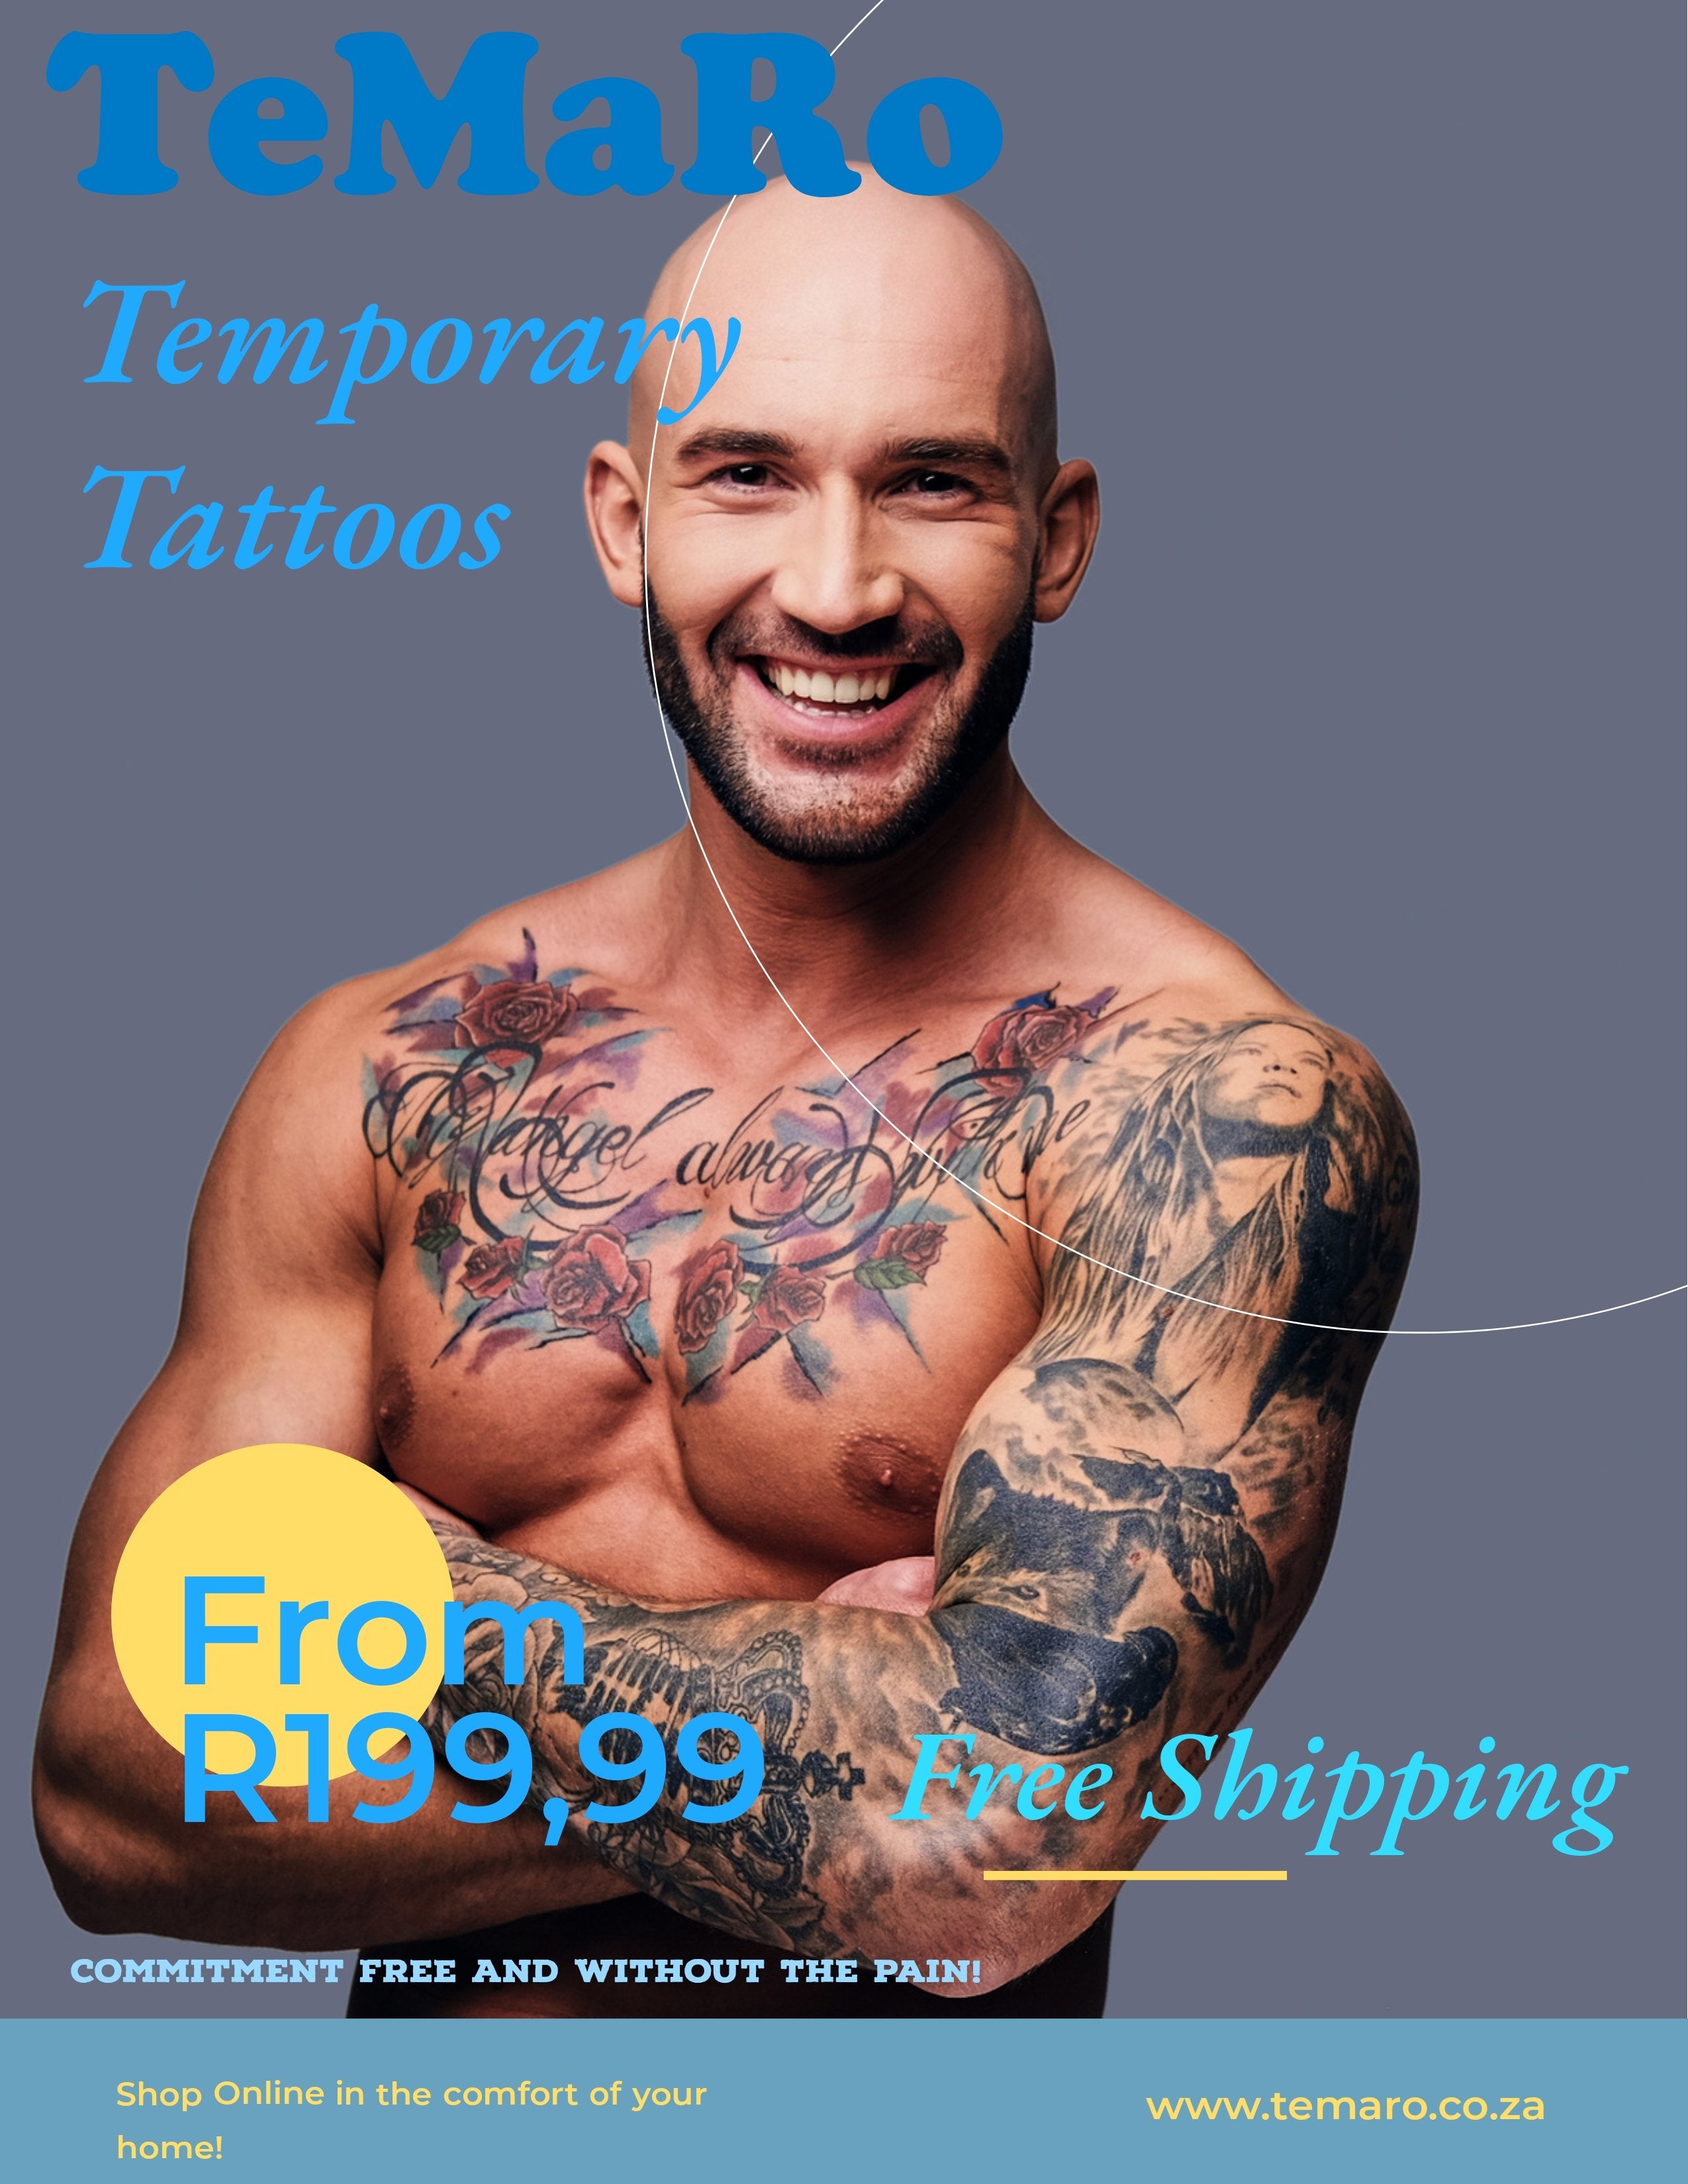 How Much Does Tattoo Removal Cost?